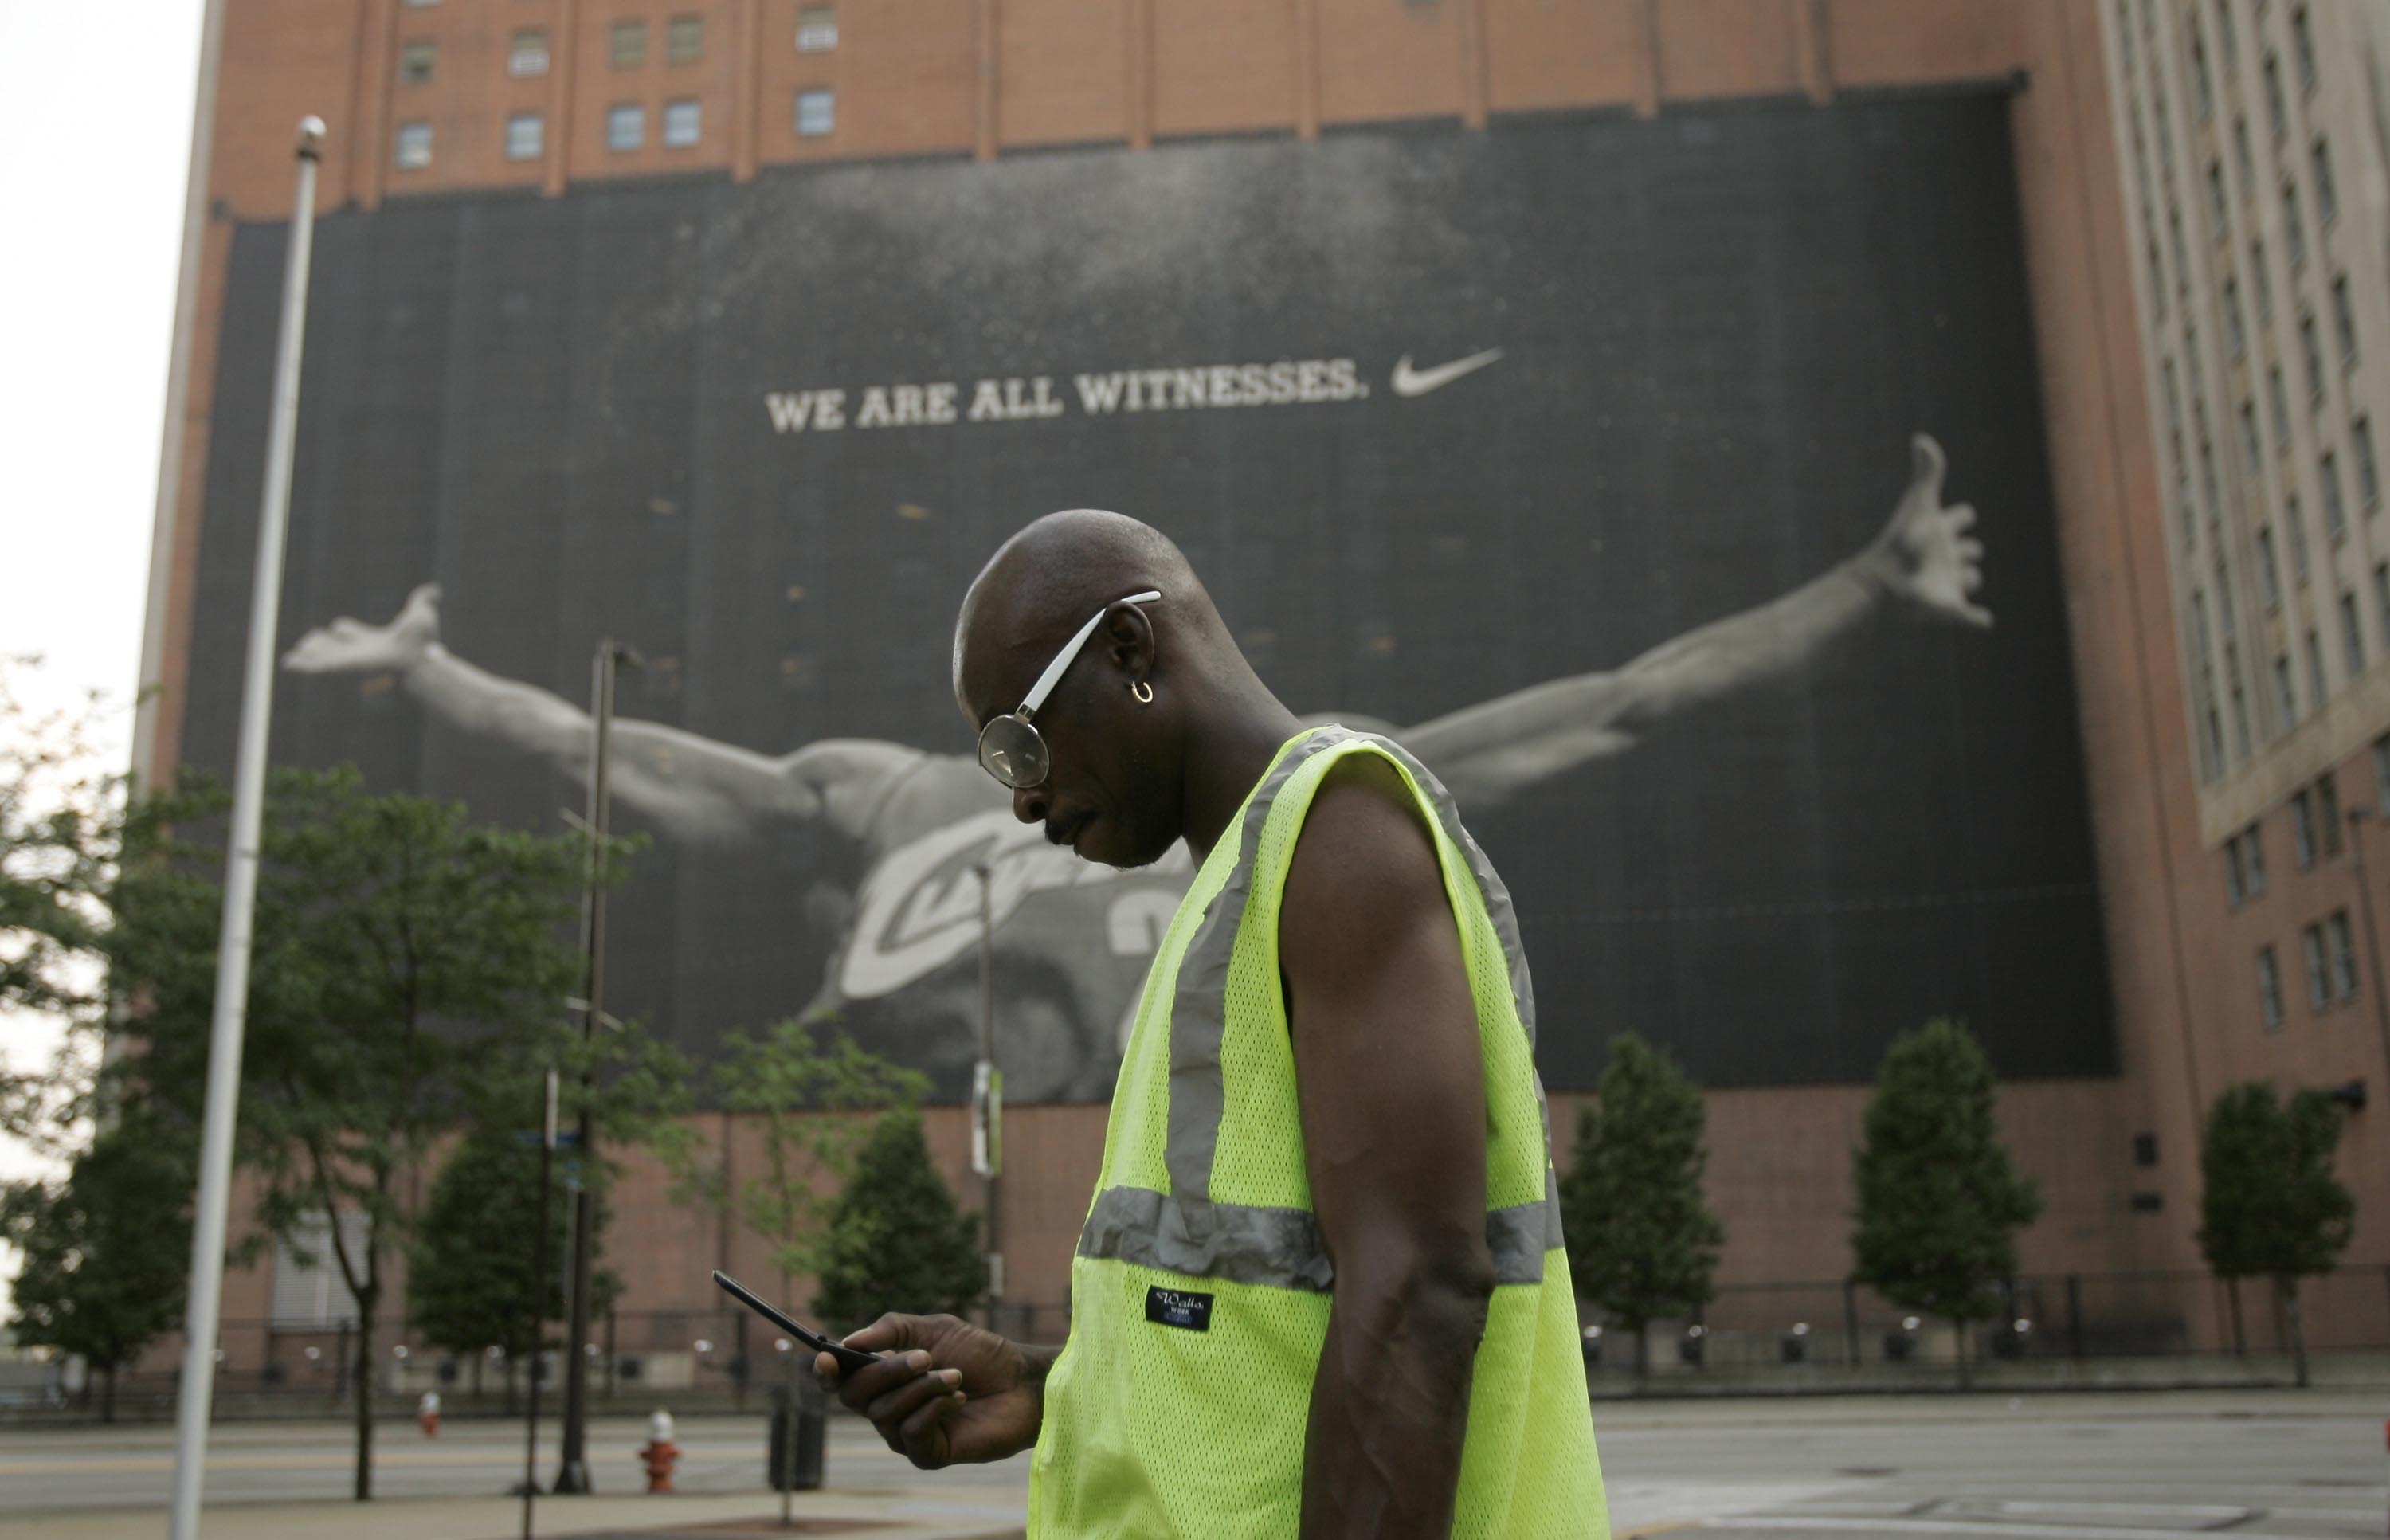 CLEVELAND - JULY 8:  A parking attendant stands near a larger than life photograph of LeBron James July 8, 2010 in Cleveland, Ohio. The two-time Most Valuable Player has the choice of remaining with the Cleveland Cavaliers or signing with a new team. (Pho